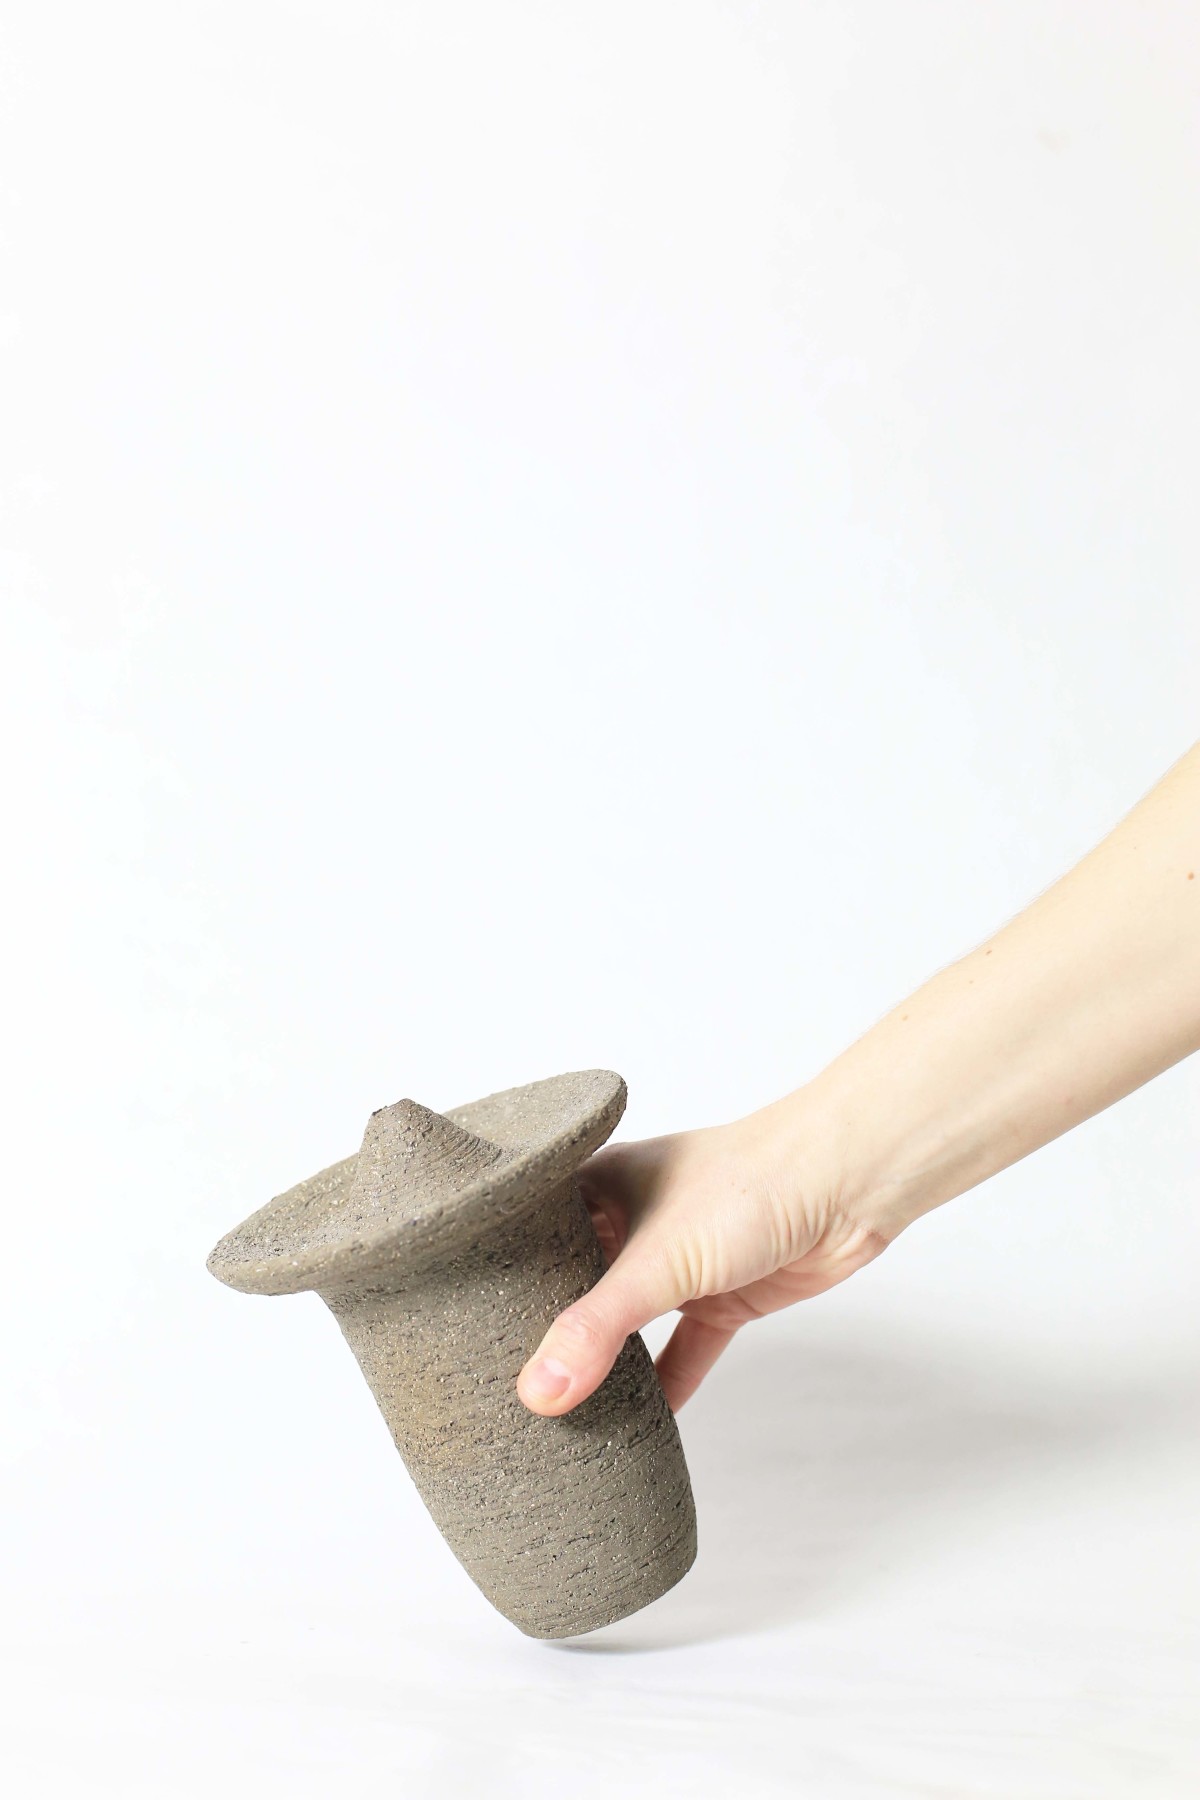 a hand holds Ufo shaped gray ceramic vase on a white background